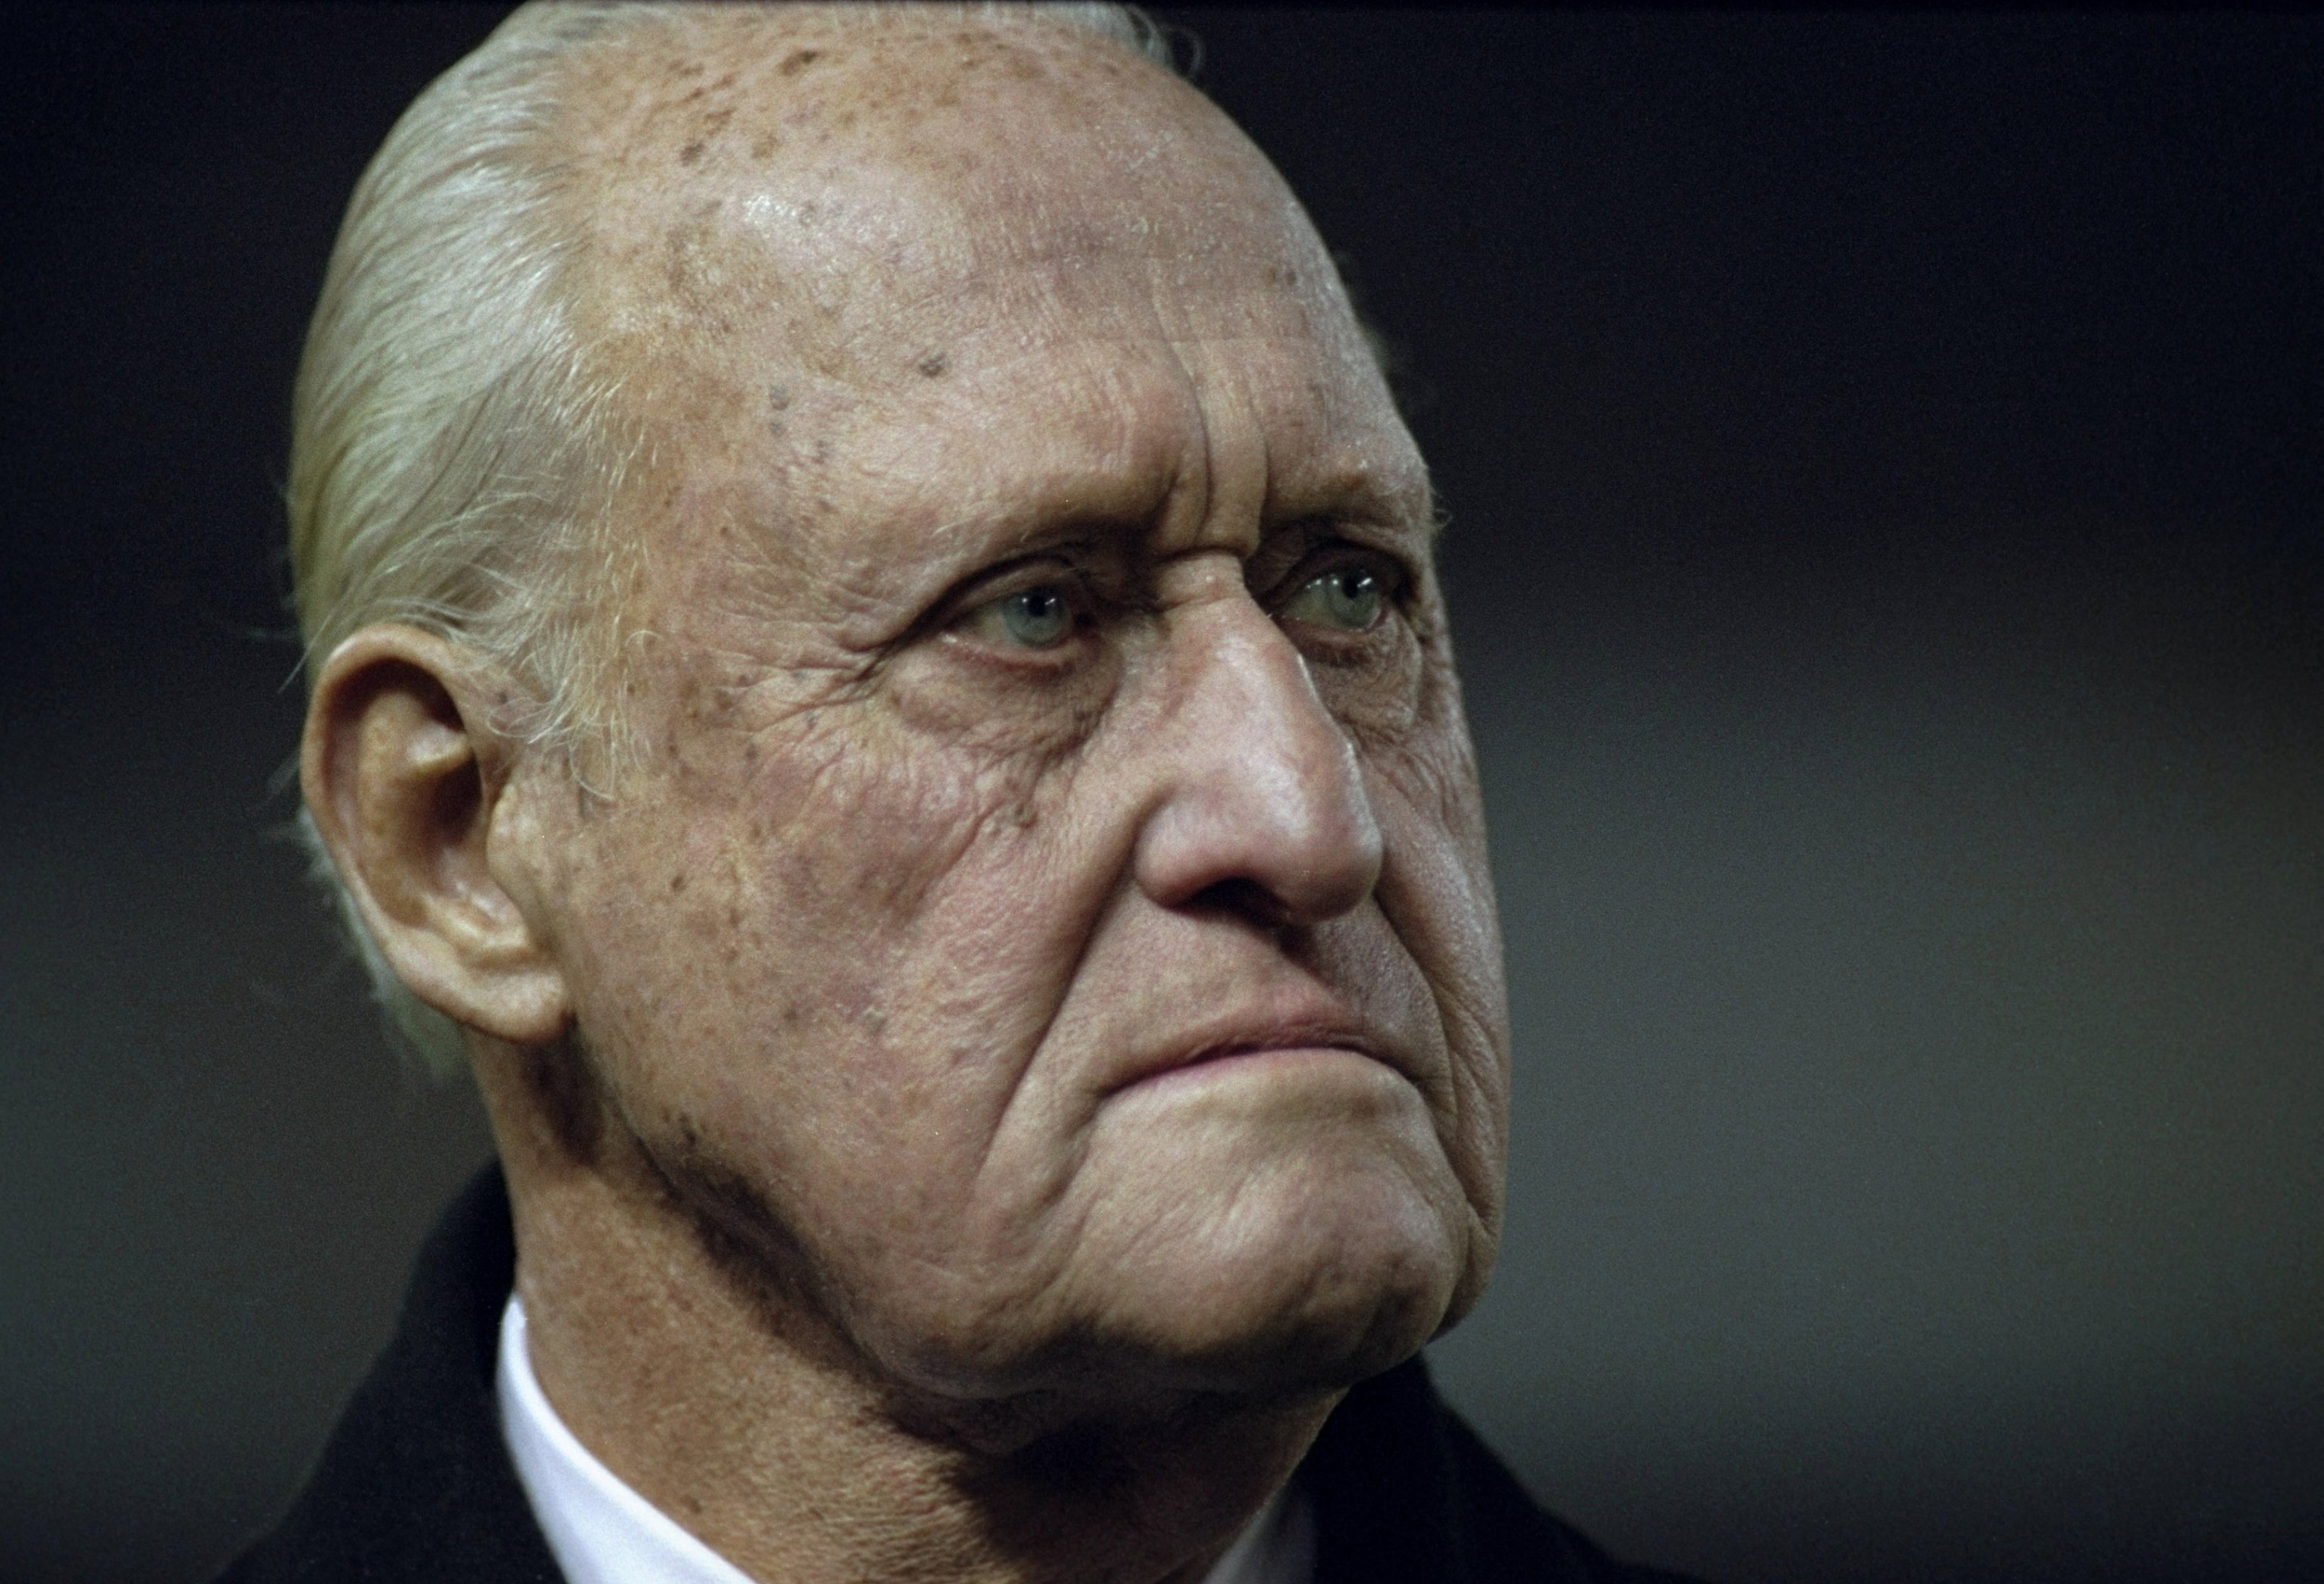 <p>Havelange was the President of FIFA from 1974 until 1998. He was also a member of the International Olympic Committee from 1963 until 2011. Sure, the Brazilian sports bigwig was named in some controversies and accusations of illicit behavior. He was, after all, the President of FIFA. Nevertheless, he played a big role in international sports and made a splash.</p><p><a href='https://www.msn.com/en-us/community/channel/vid-cj9pqbr0vn9in2b6ddcd8sfgpfq6x6utp44fssrv6mc2gtybw0us'>Follow us on MSN to see more of our exclusive entertainment content.</a></p>